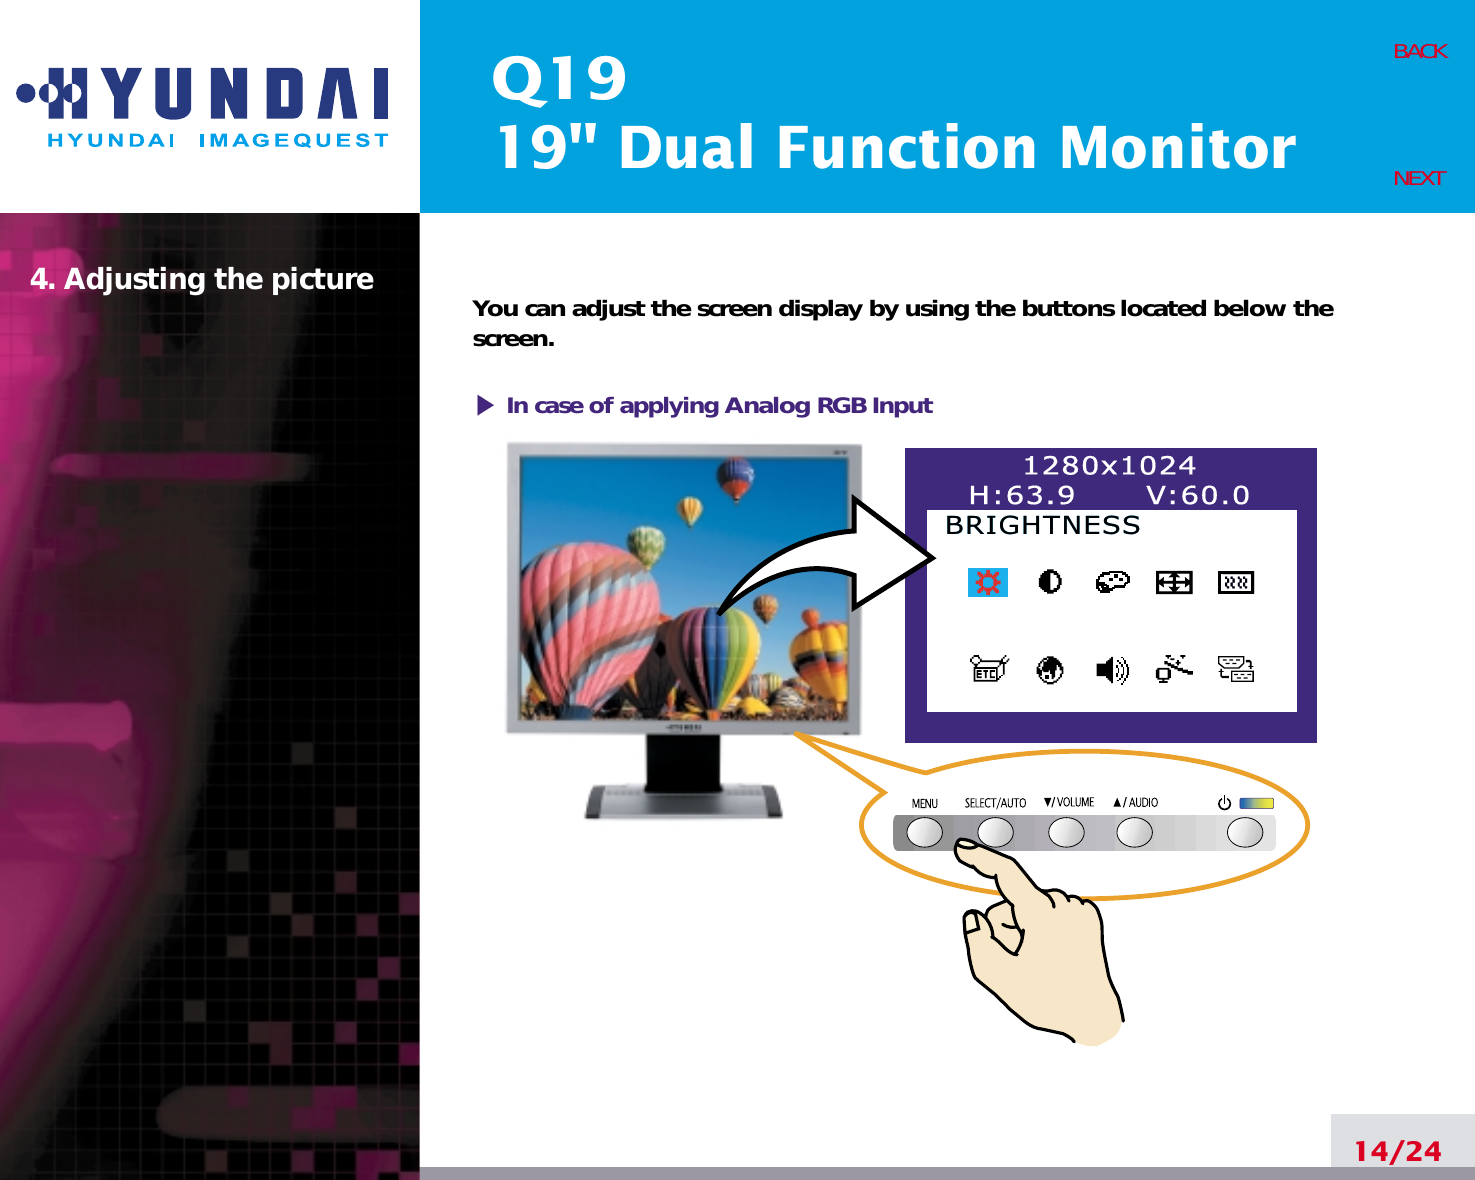 Q1919&quot; Dual Function Monitor4. Adjusting the picture14/24BACKNEXTYou can adjust the screen display by using the buttons located below thescreen.1280x1024H:63.9      V:60.0BRIGHTNESSBRIGHTNESSIn case of applying Analog RGBInput